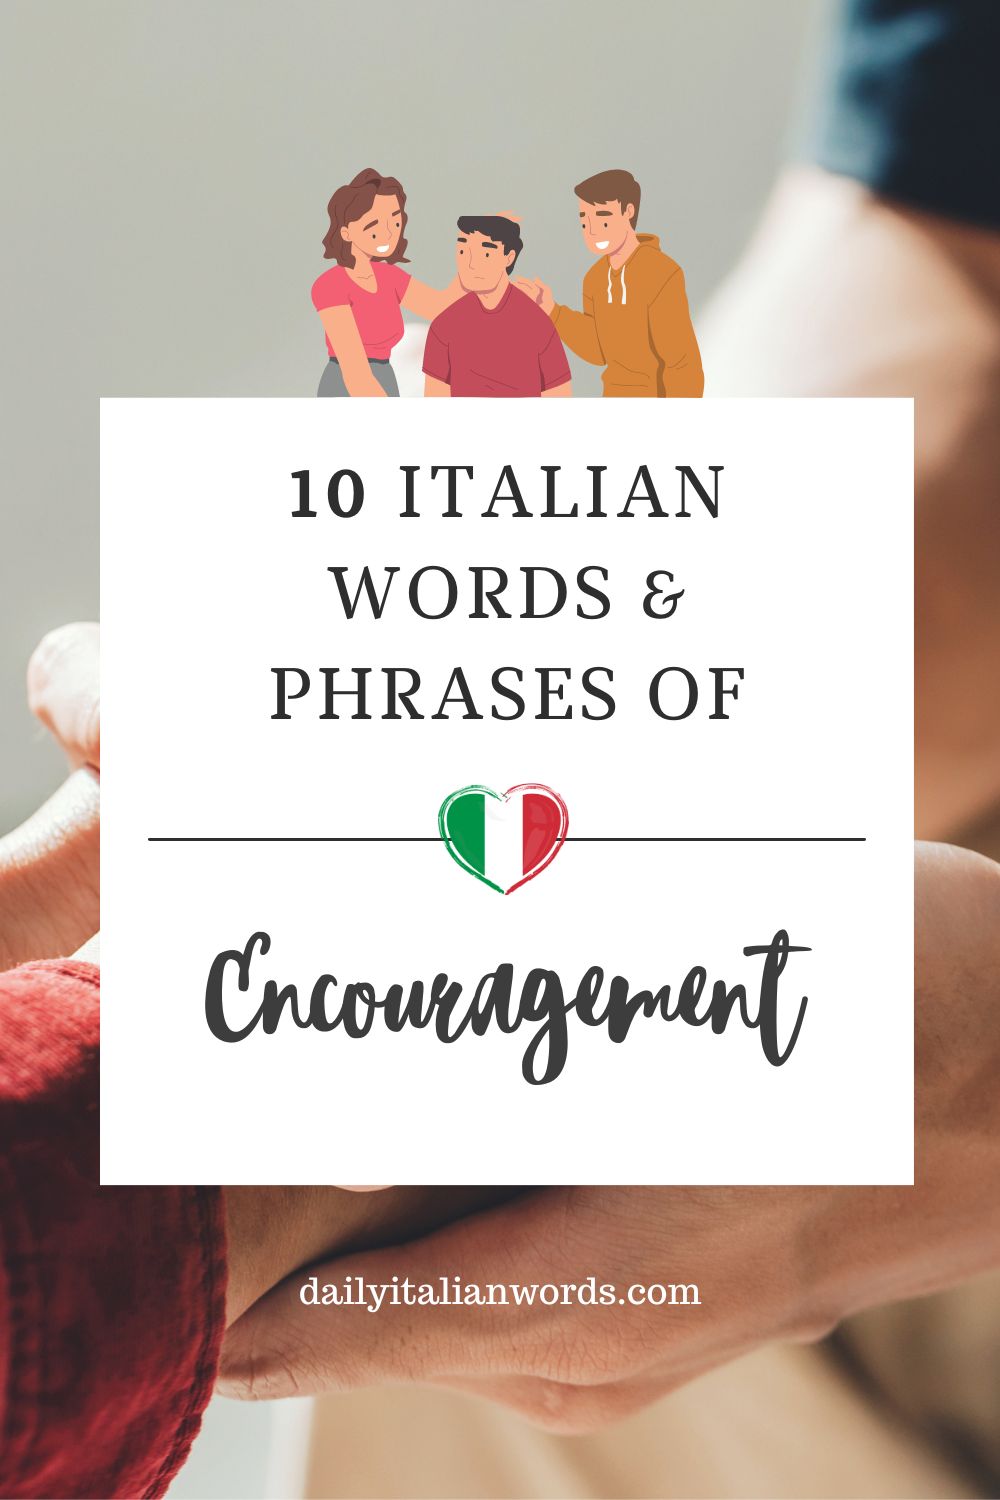 10 italian words and phrases of encouragement